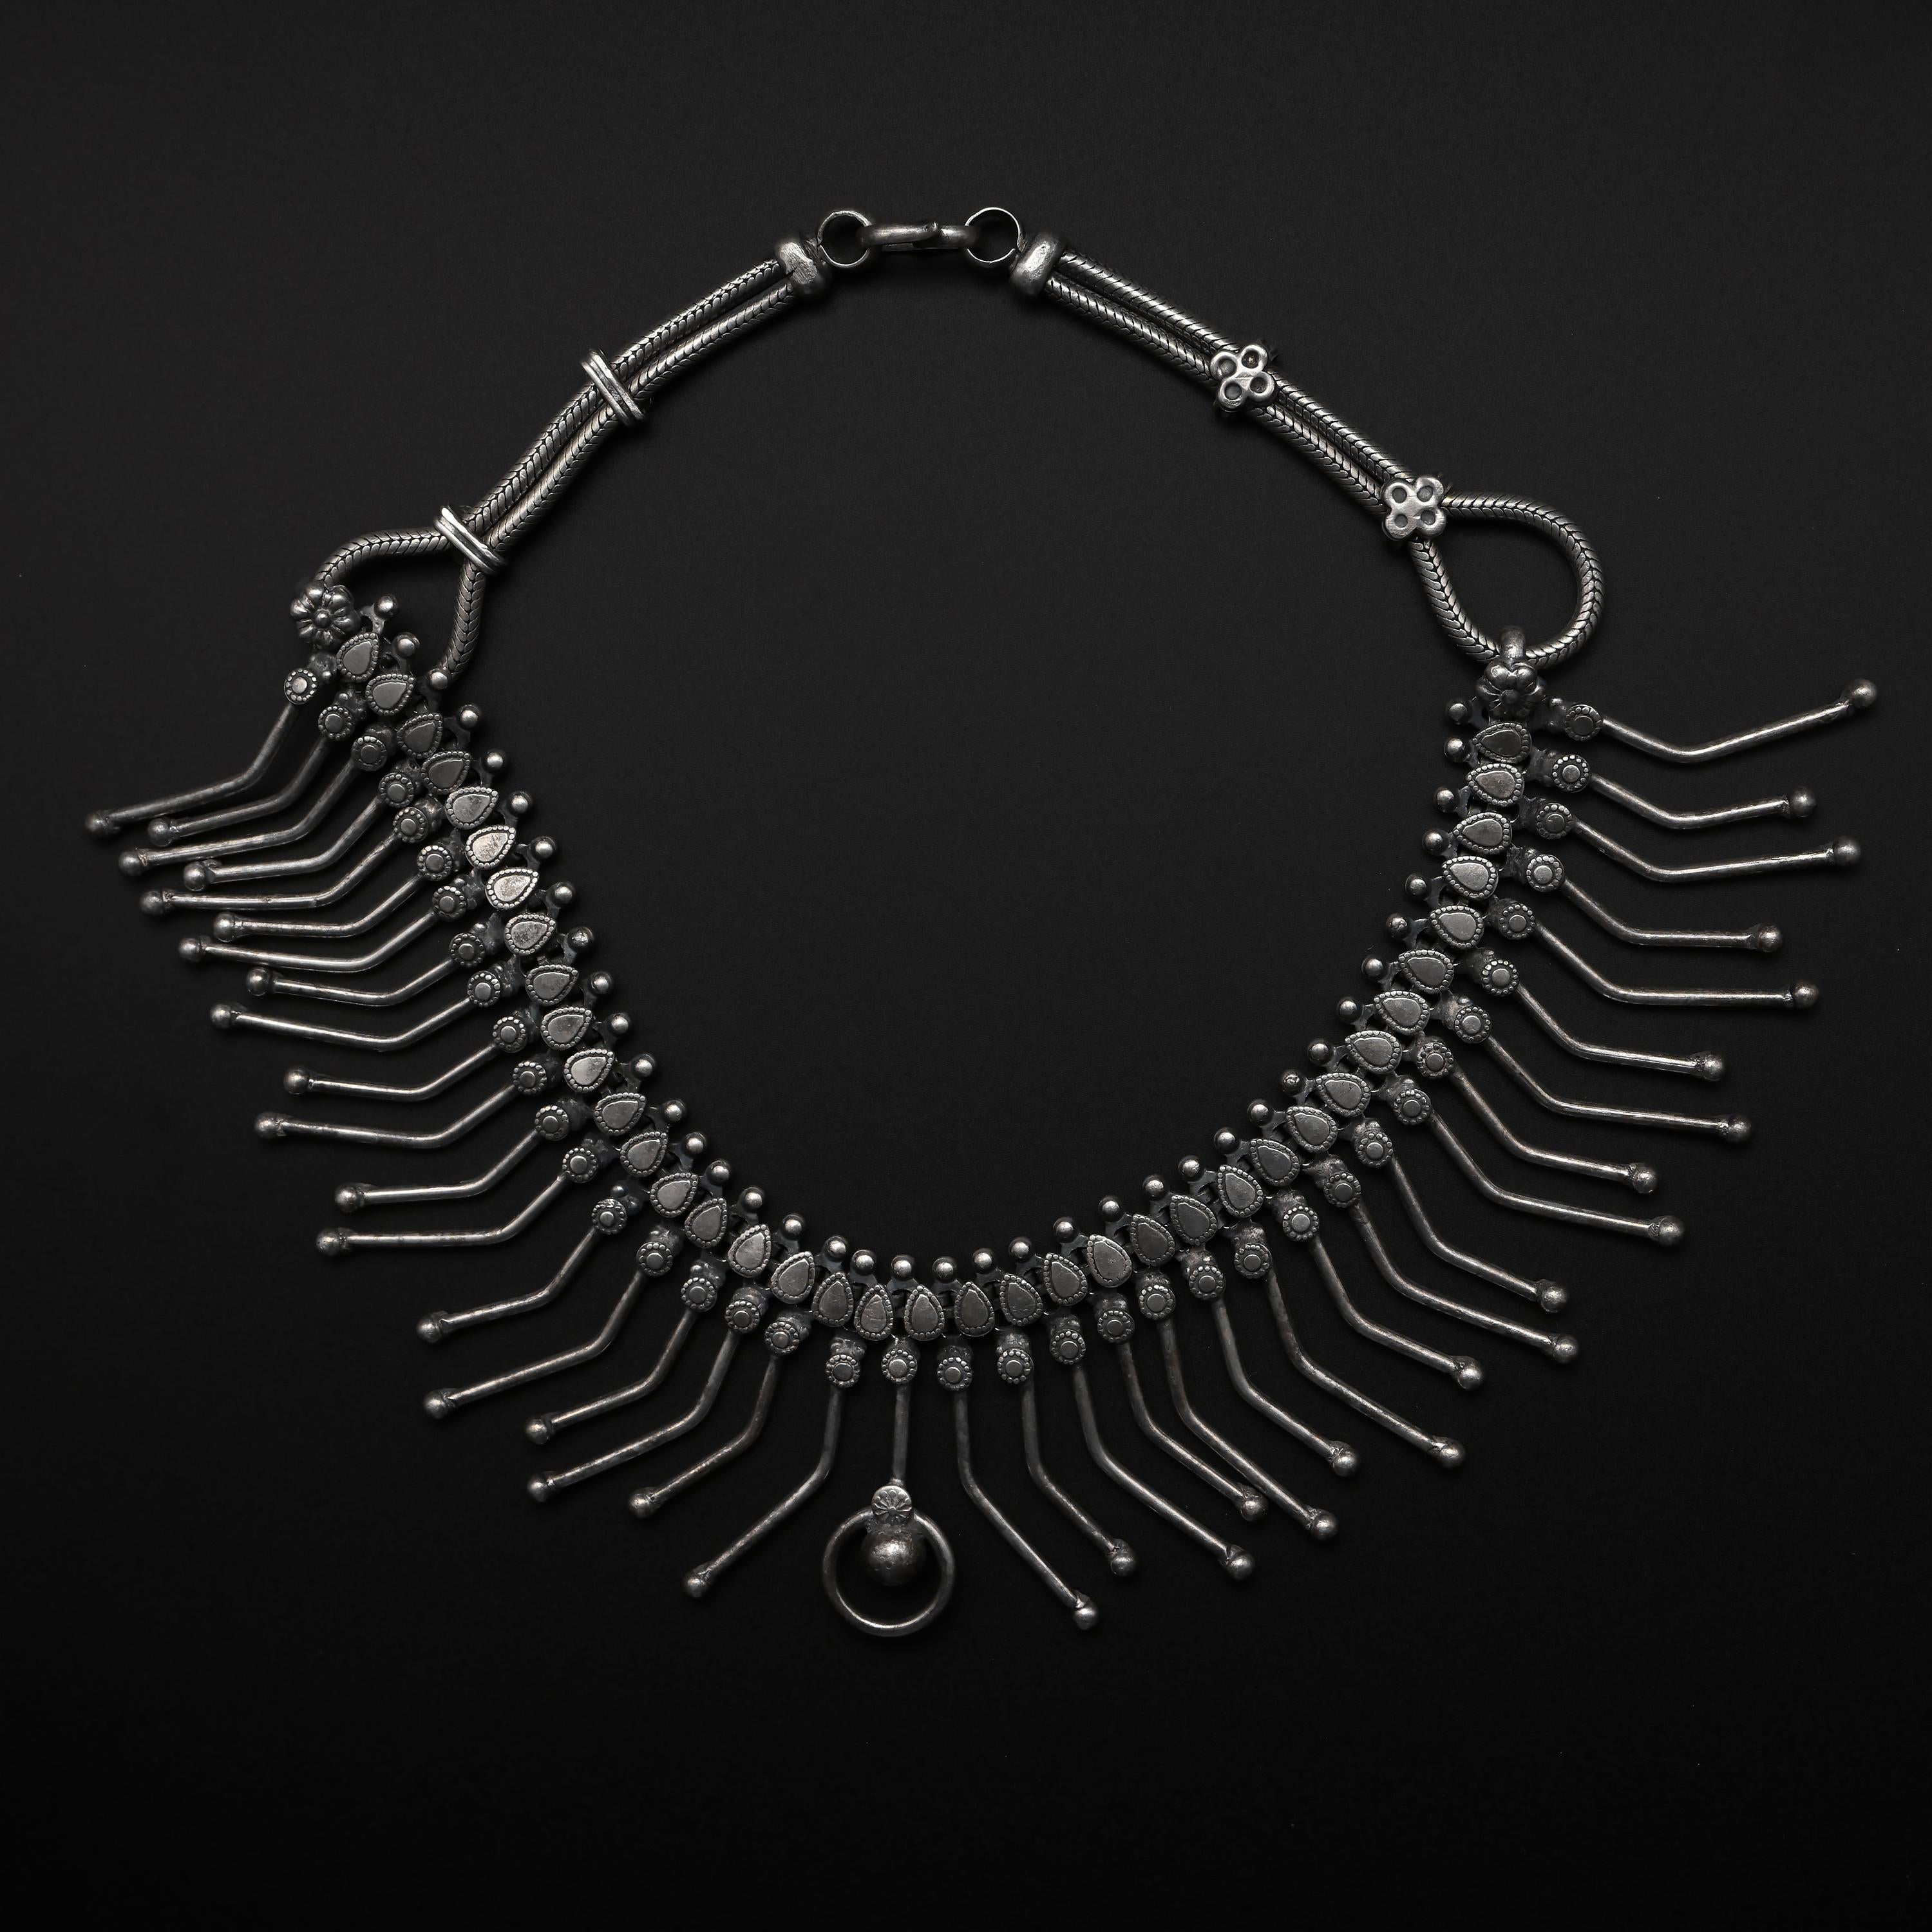 A large, dramatic statement necklace rendered in sterling silver and dating to the Art Deco era.  A lavish amount of silver was used in creating this piece: 115.19 grams; that’s a quarter of a pound of sterling silver.  

Each component of this